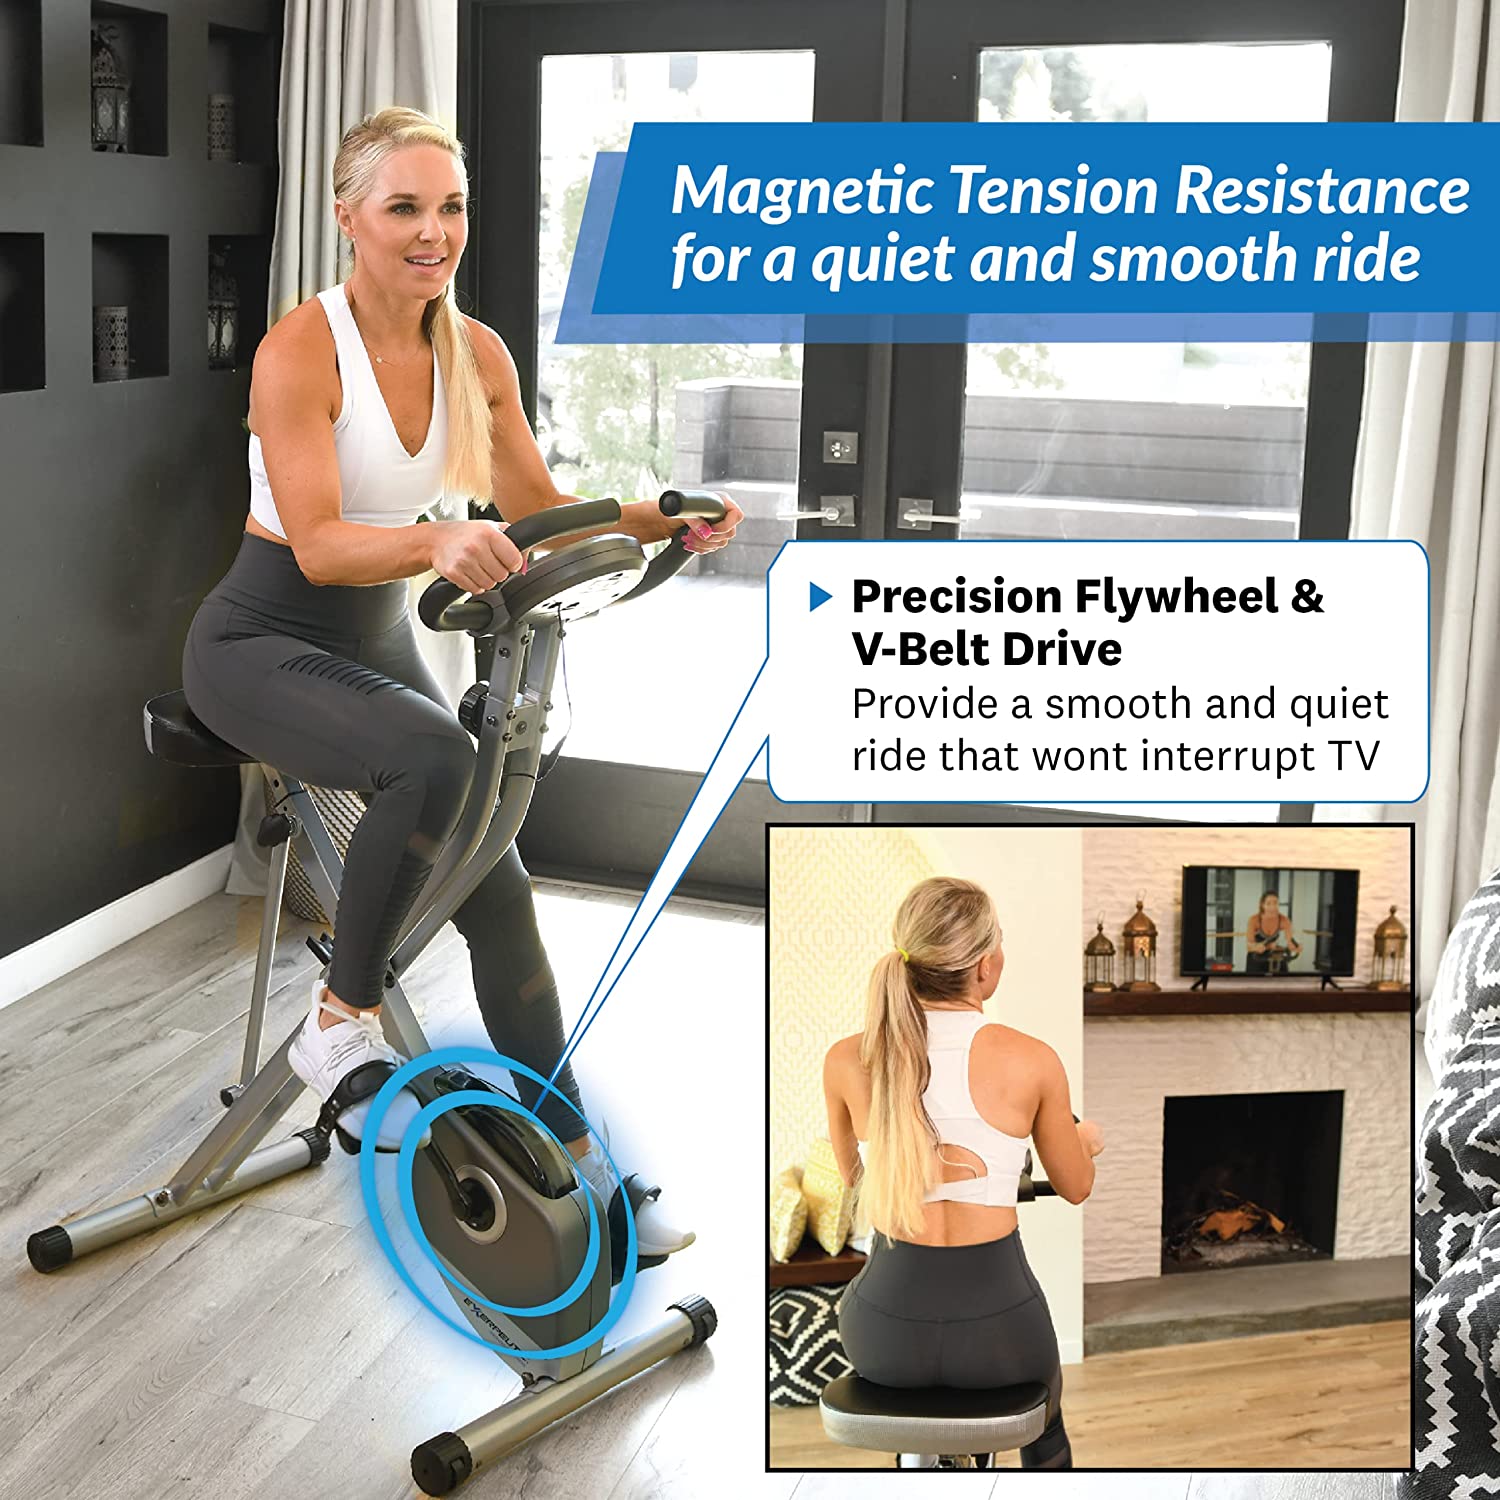 Exerpeutic Exercise Bike, Foldable Magnetic Upright with Heart Pulse Sensors and LCD Monitor, Cardio Fitness, 300lbs Weight Capacity - image 4 of 9